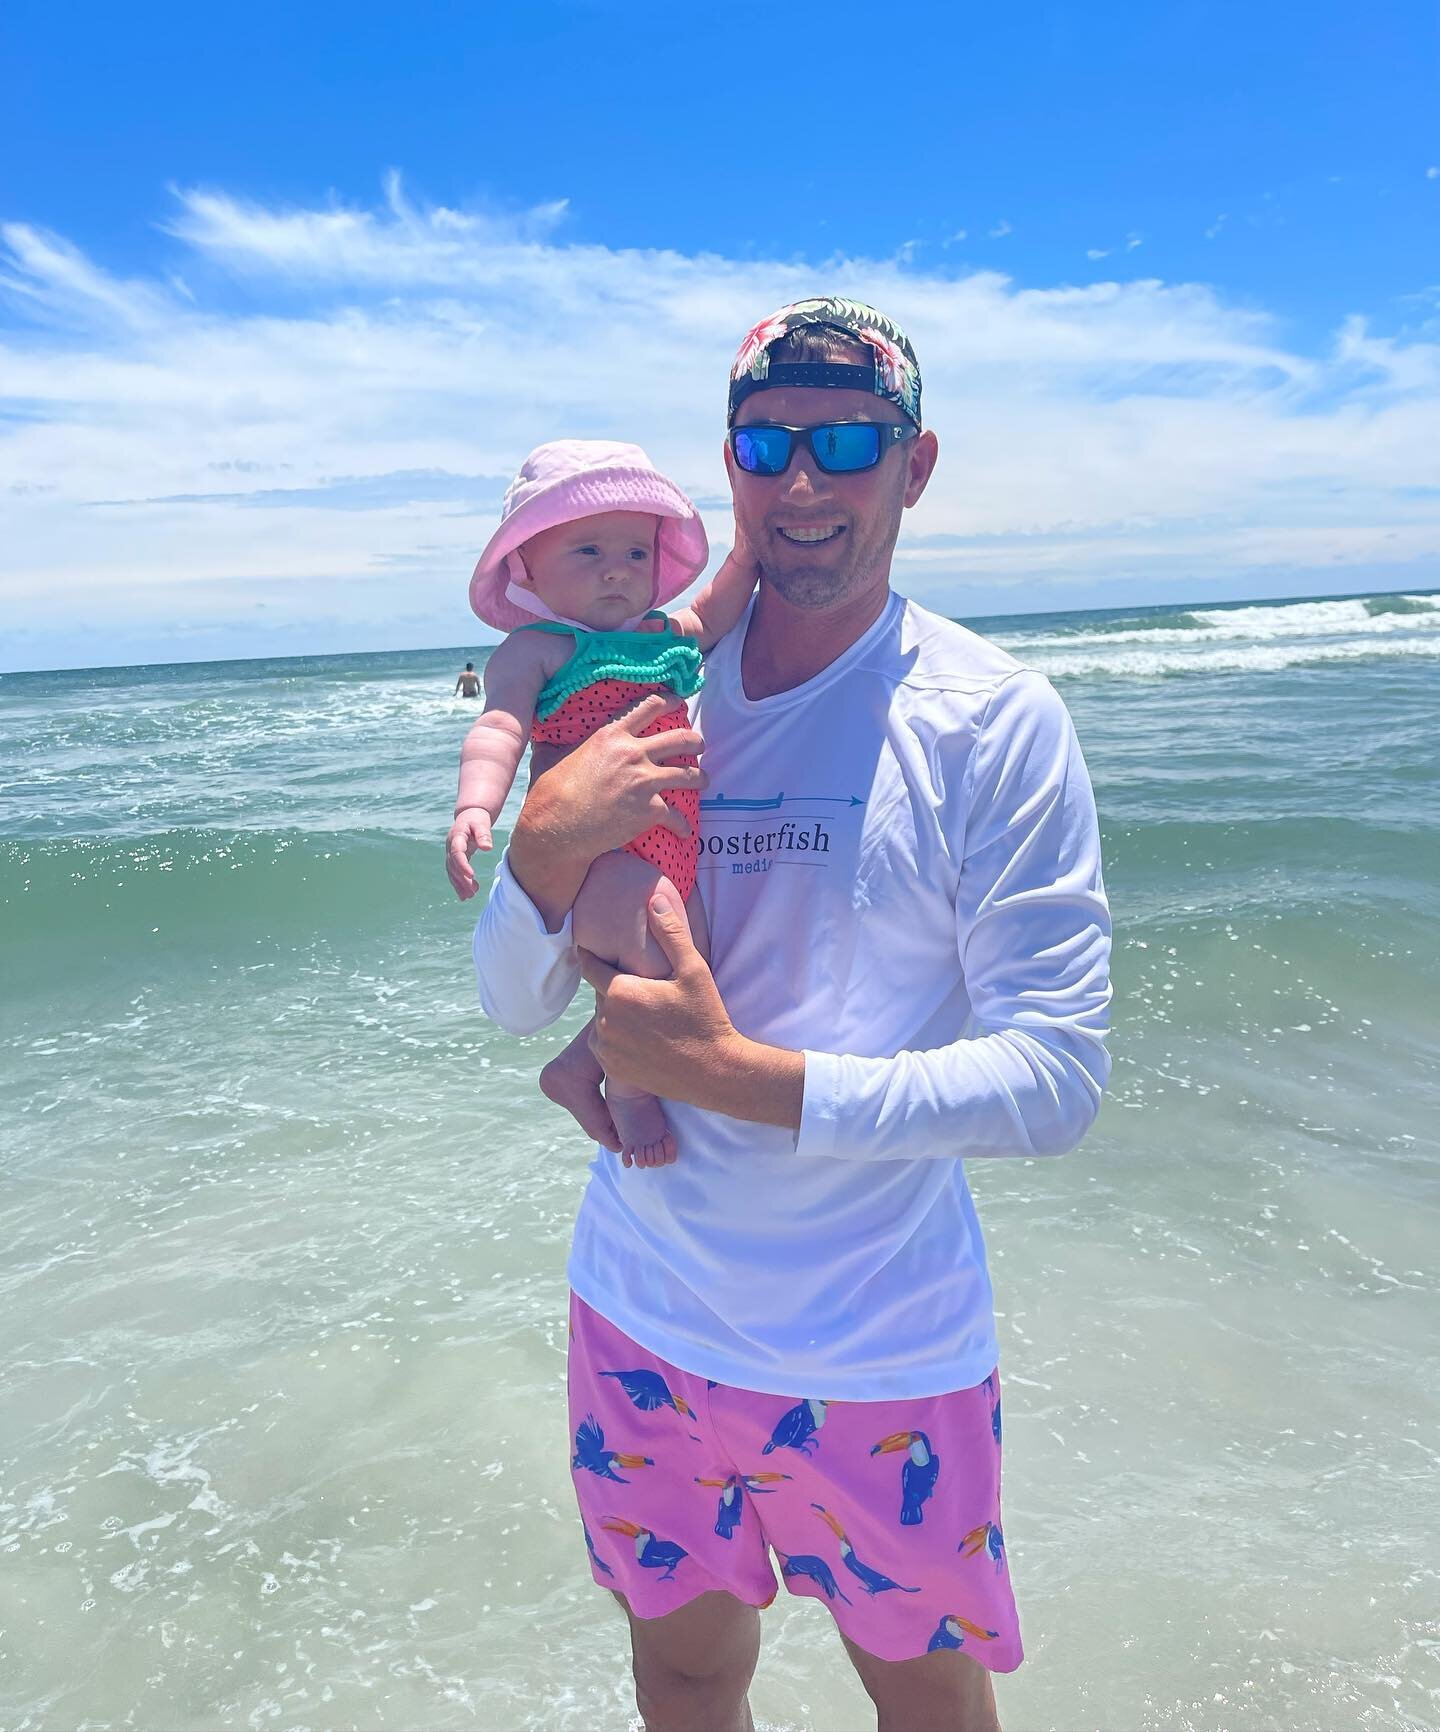 Finley&rsquo;s first beach trip! Hanging out with our @roosterfishmedia team for our annual retreat! 🌞🤙Excited to bring it home next week with the family and a 40th birthday celebration.